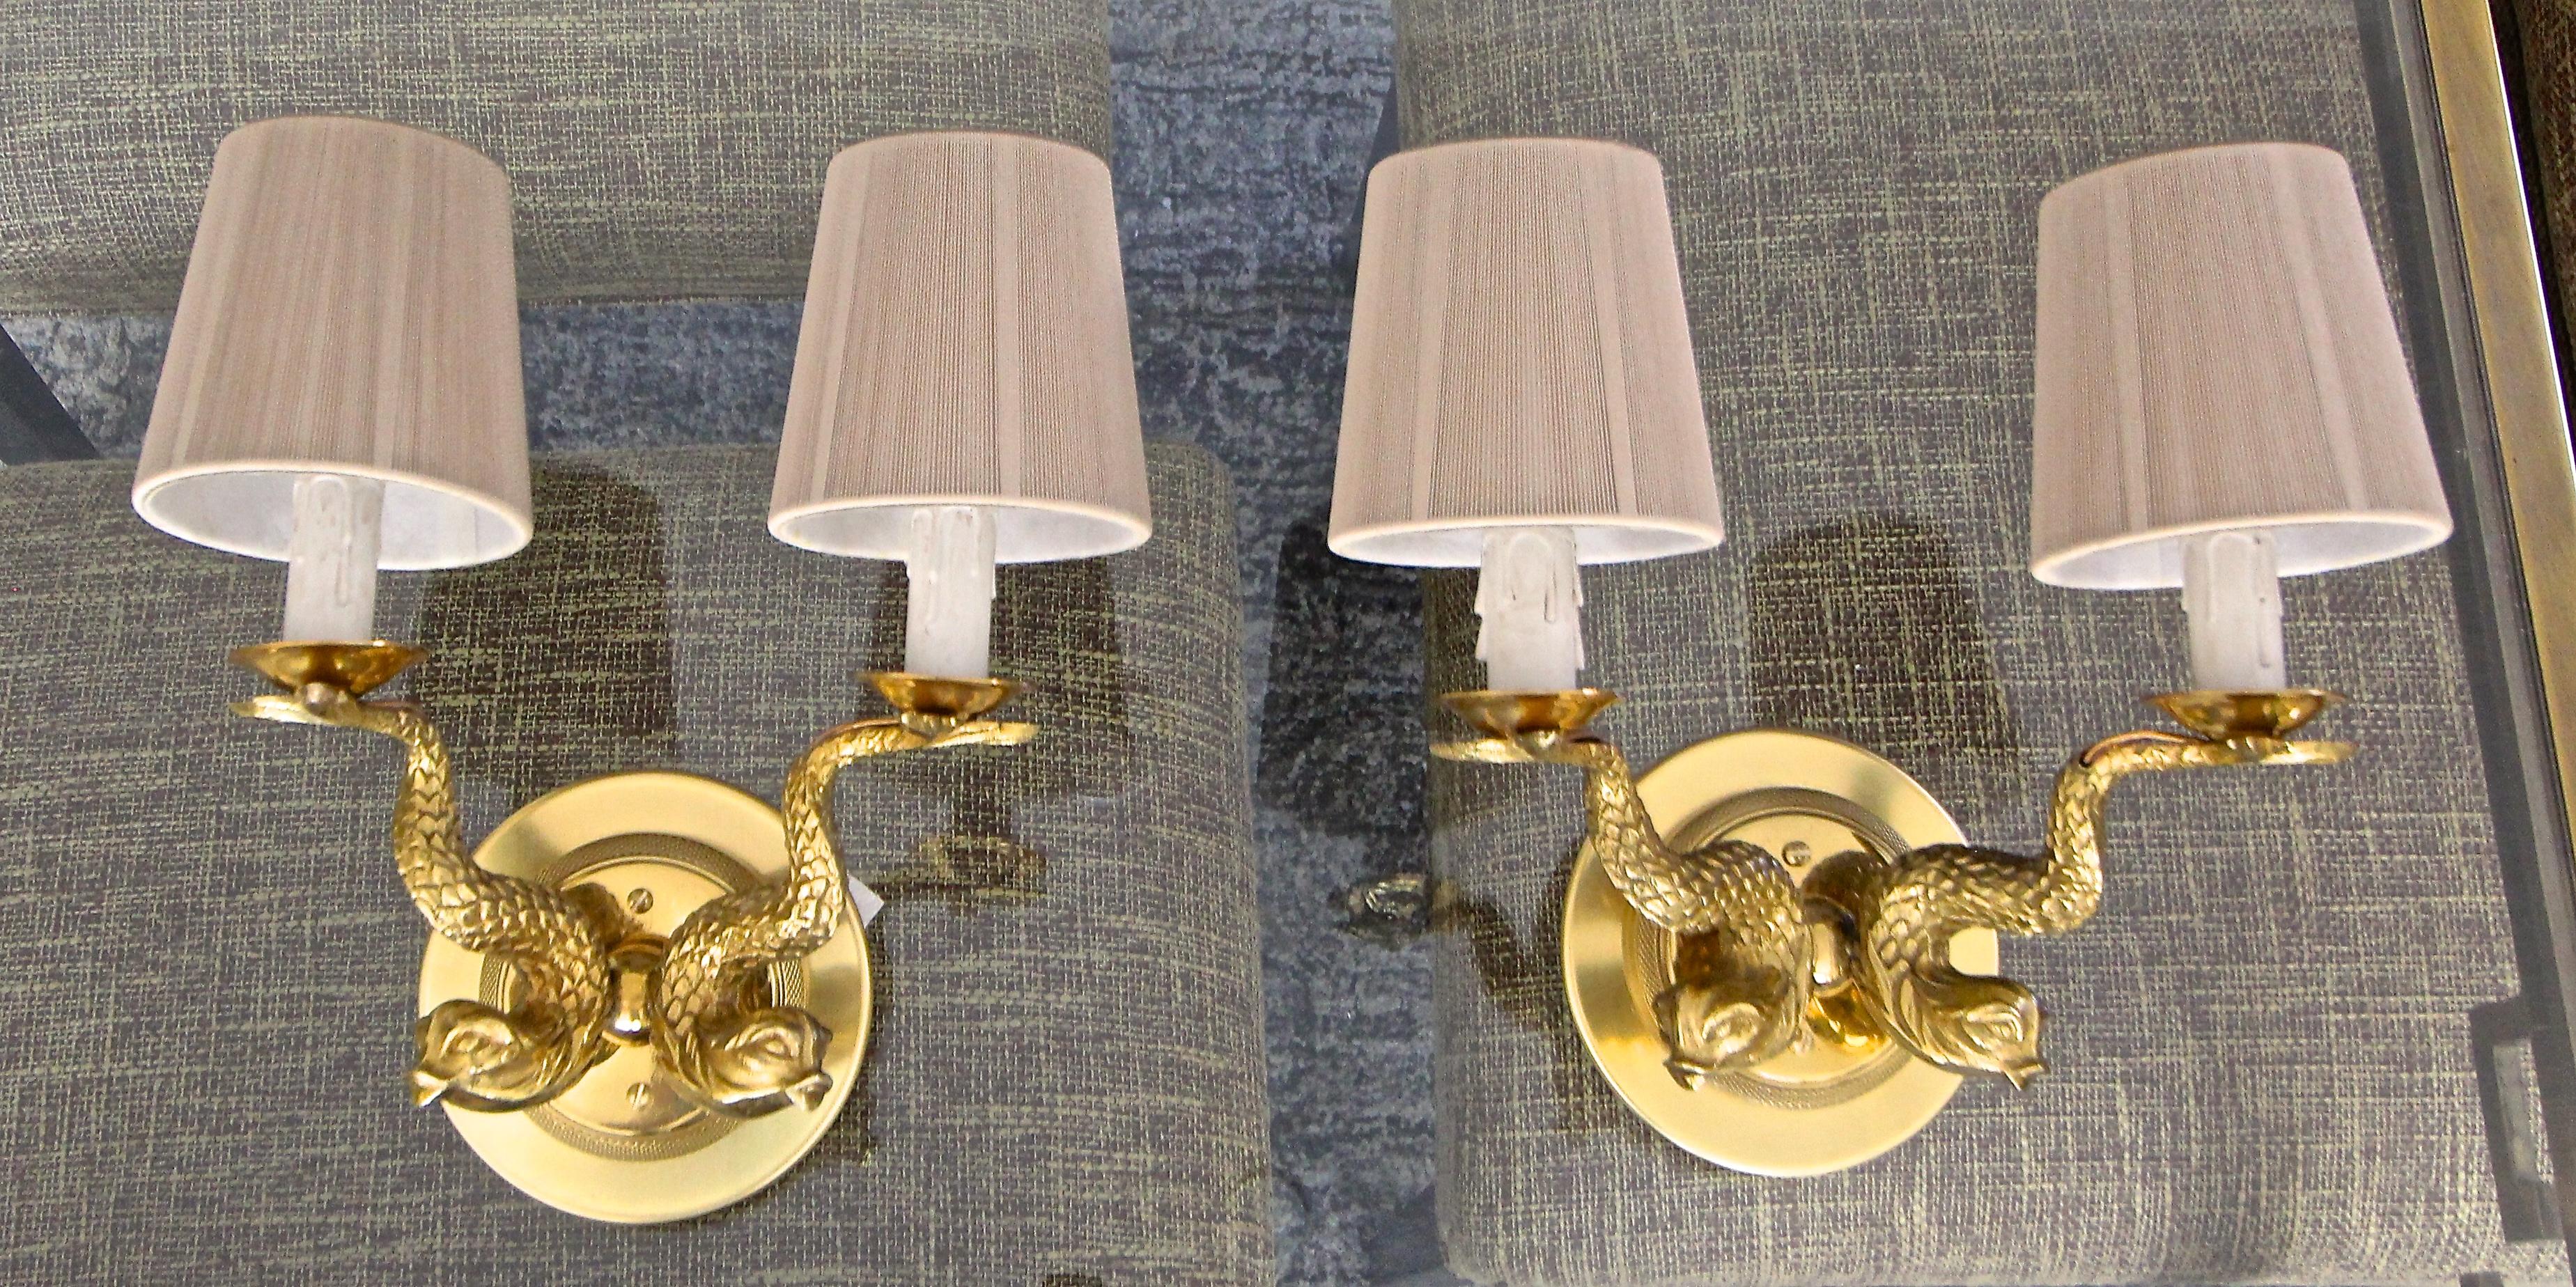 Pair of French two-light French neoclassic style brass wall sconces with dolphin motif. Expertly crafted with high quality detailing throughout. Newly wired with new candelabra sockets. Dimensions: 8.5